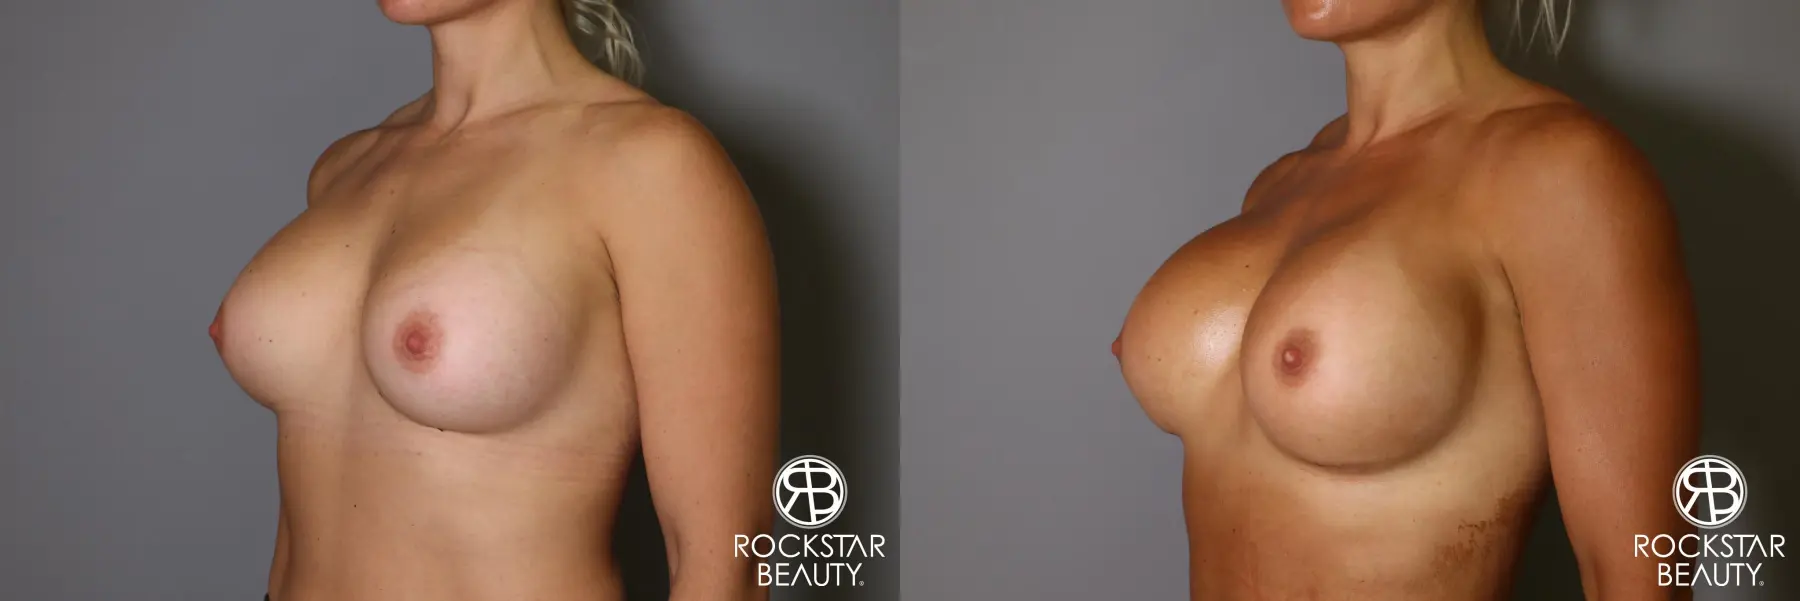 Breast Implant Exchange: Patient 9 - Before and After 4